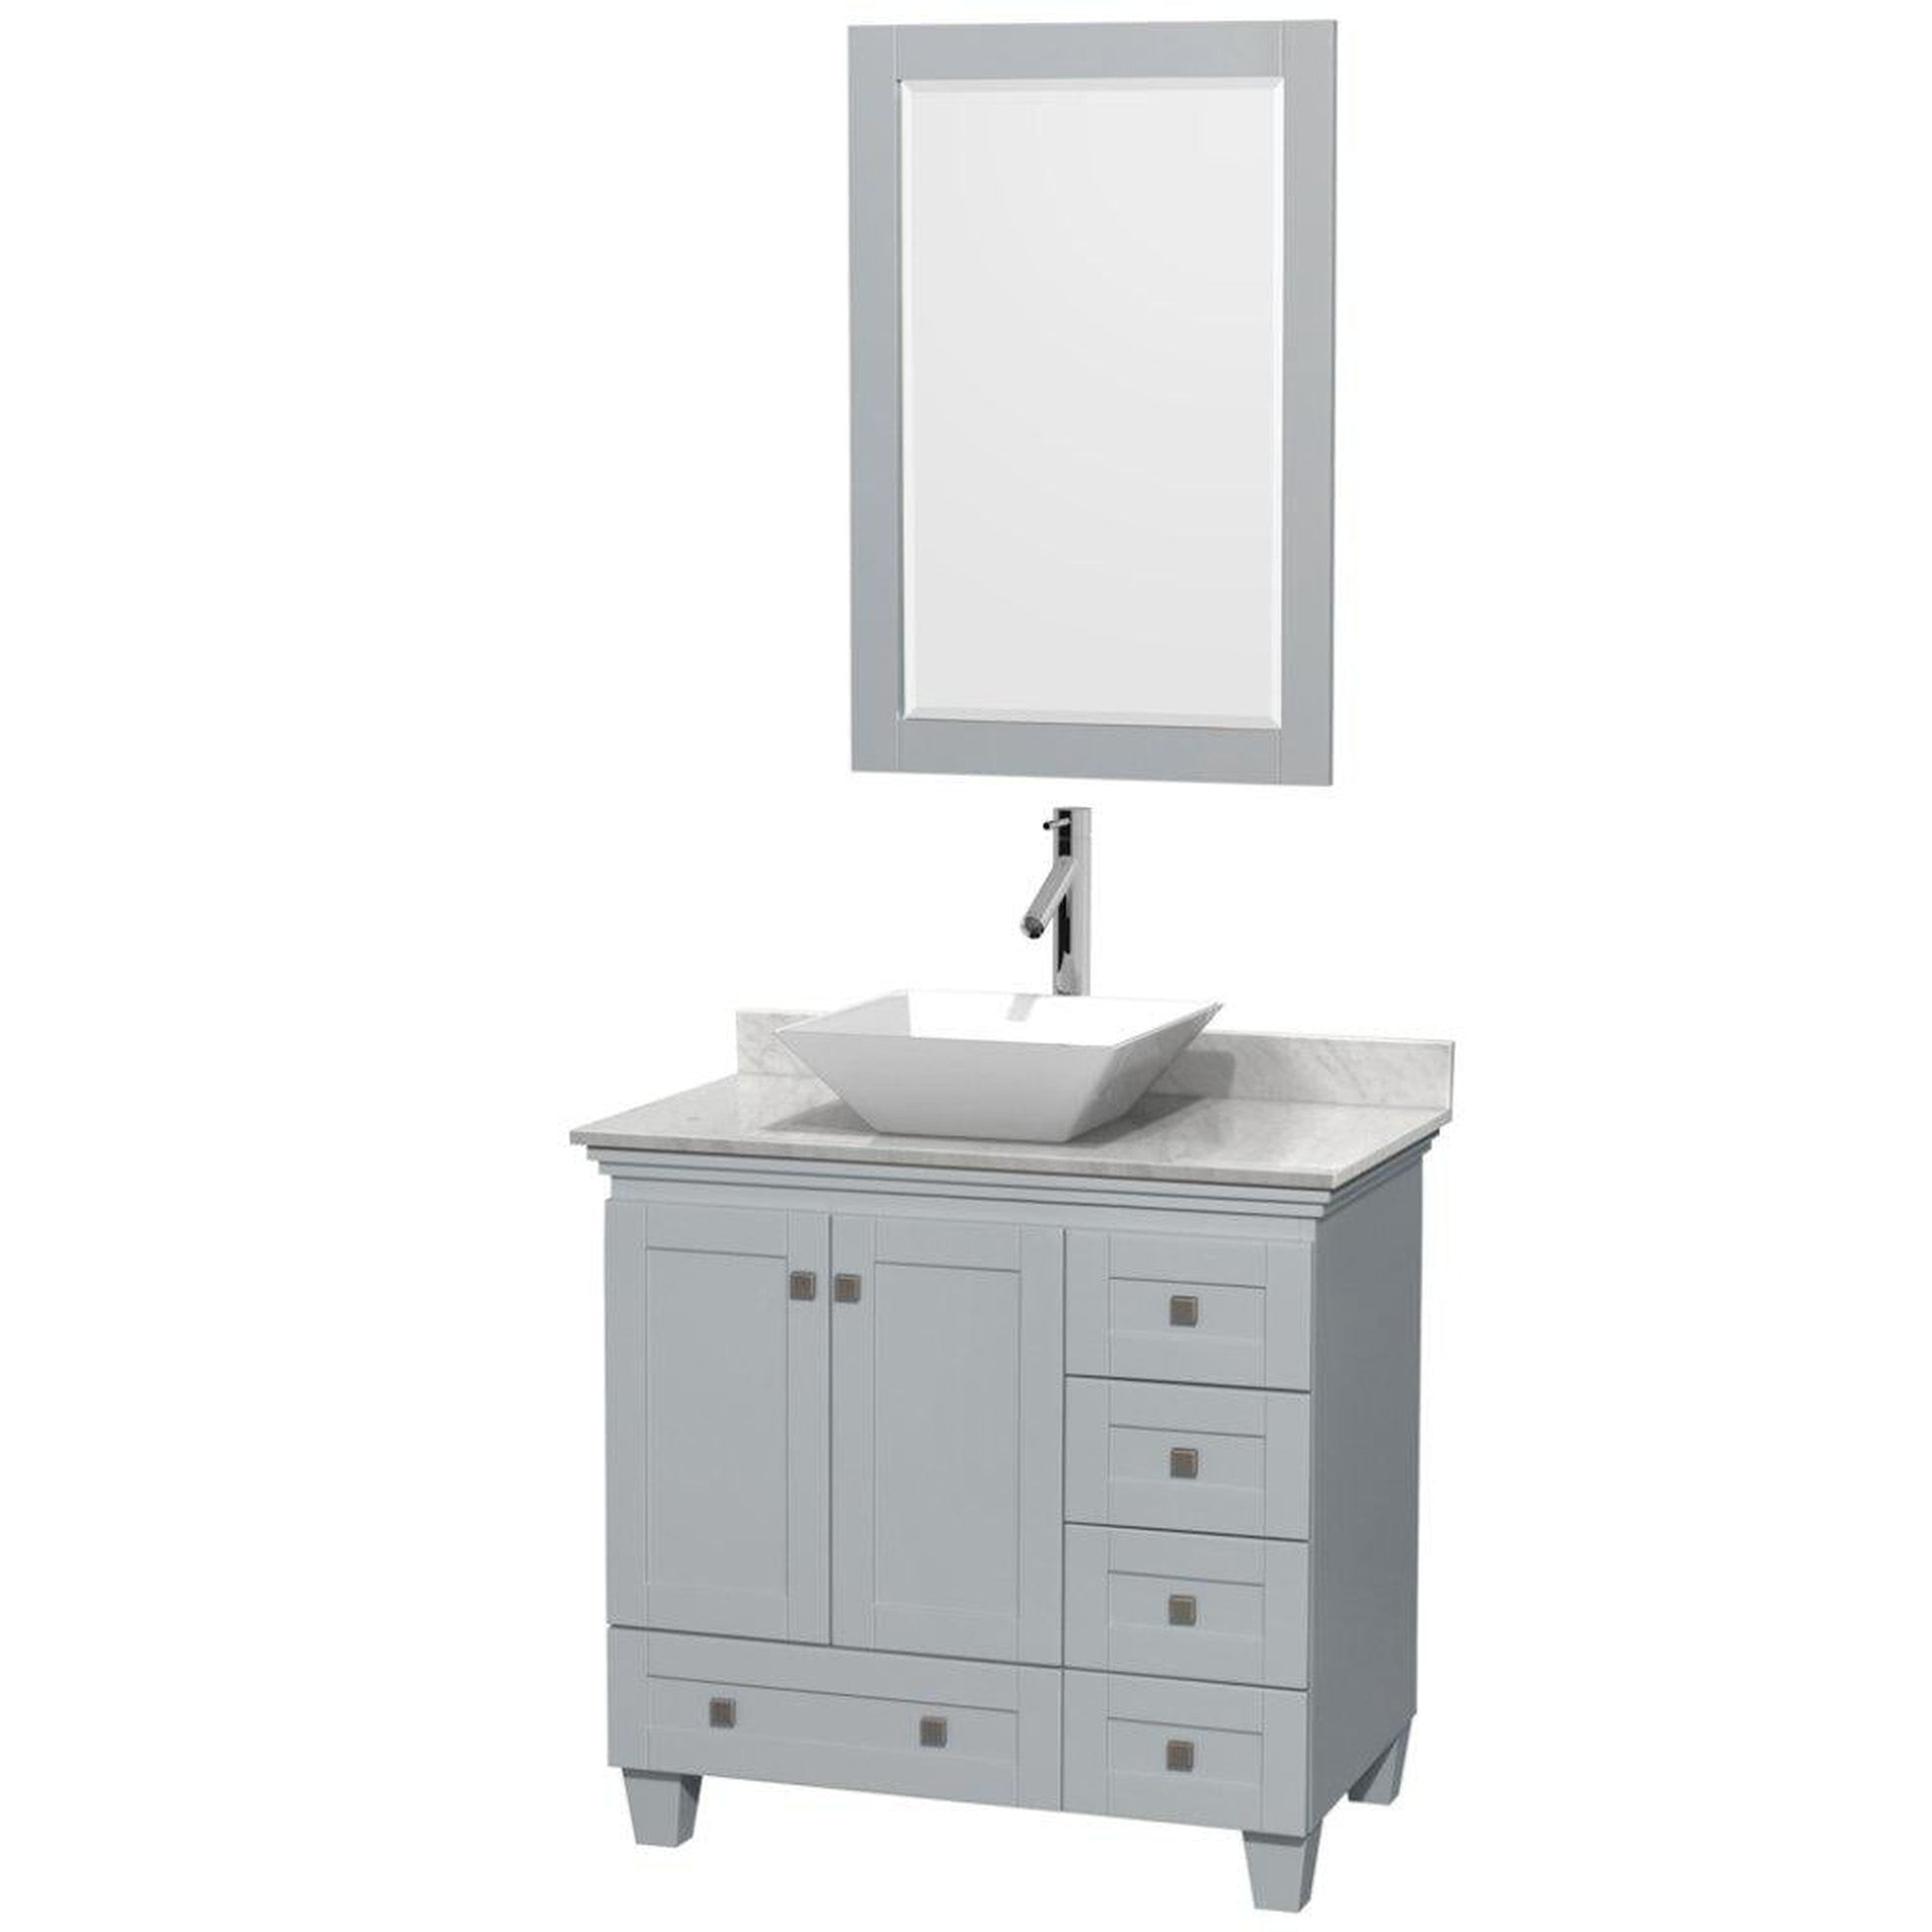 Wyndham Collection Acclaim 36" Single Bathroom Oyster Gray Vanity Set With White Carrara Marble Countertop, Pyra White Porcelain Sink, and 24" Mirror